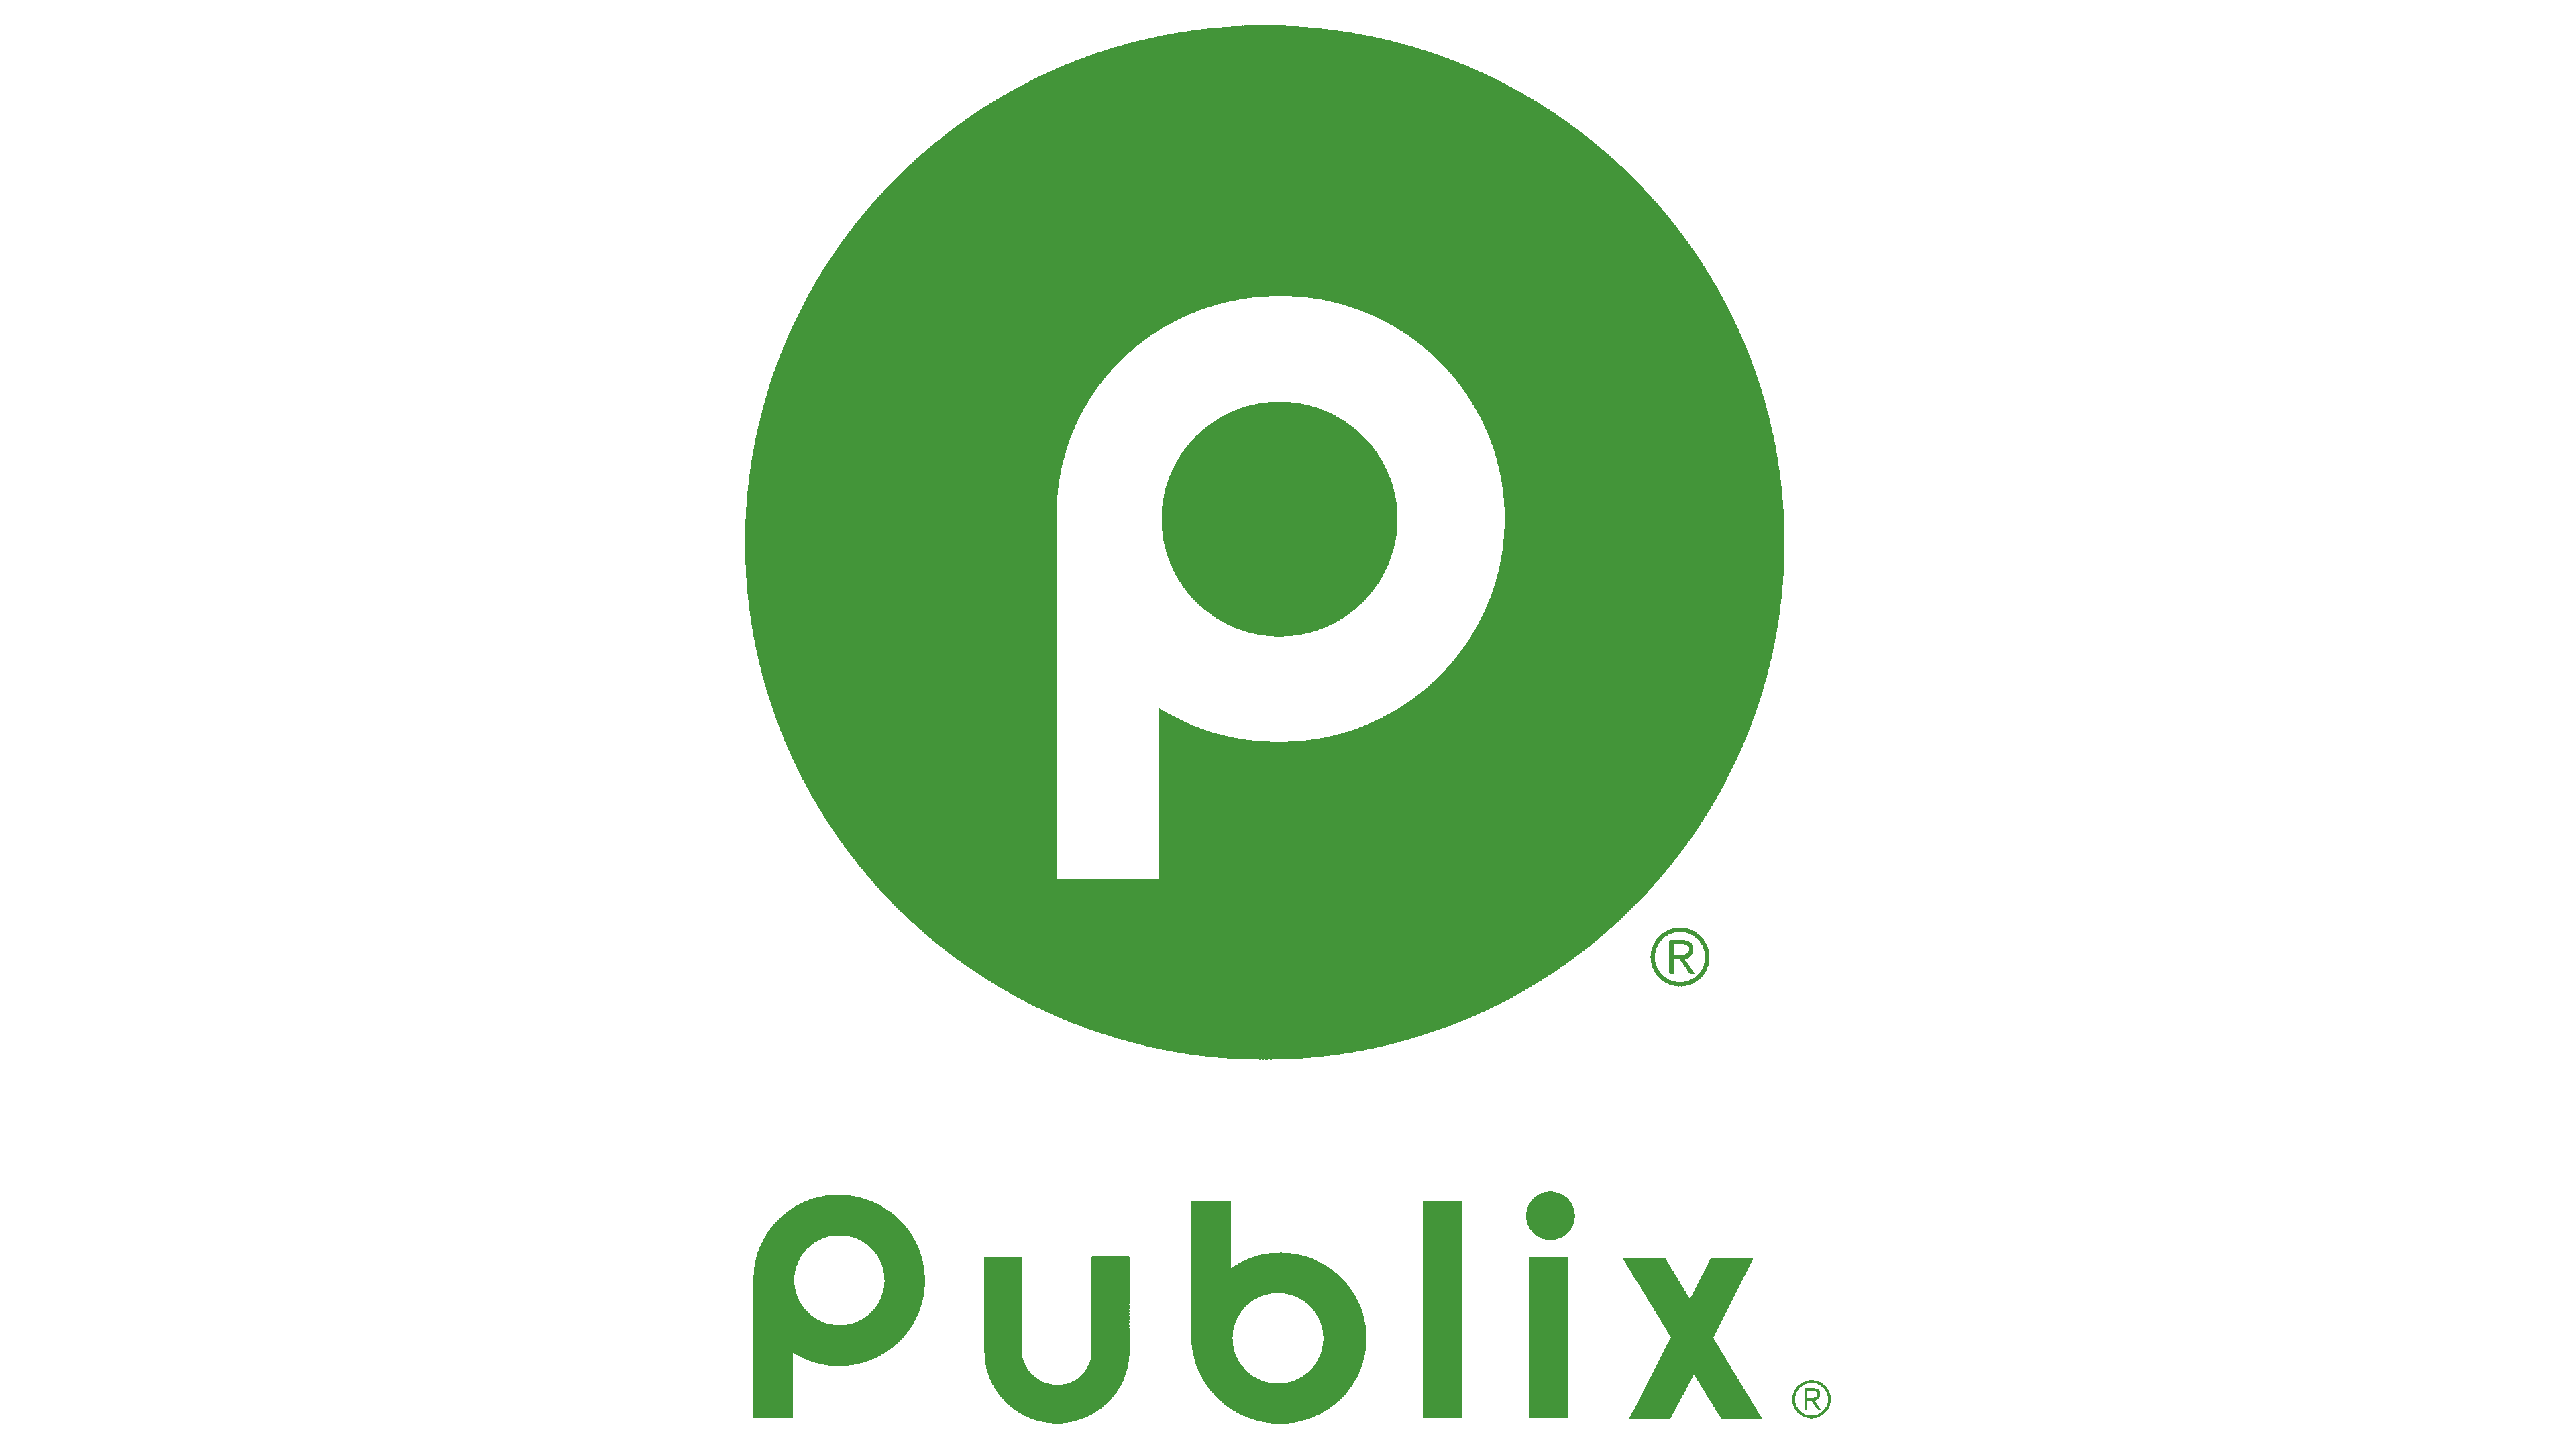 Publix Reports Third Quarter 2022 Results and Stock Price